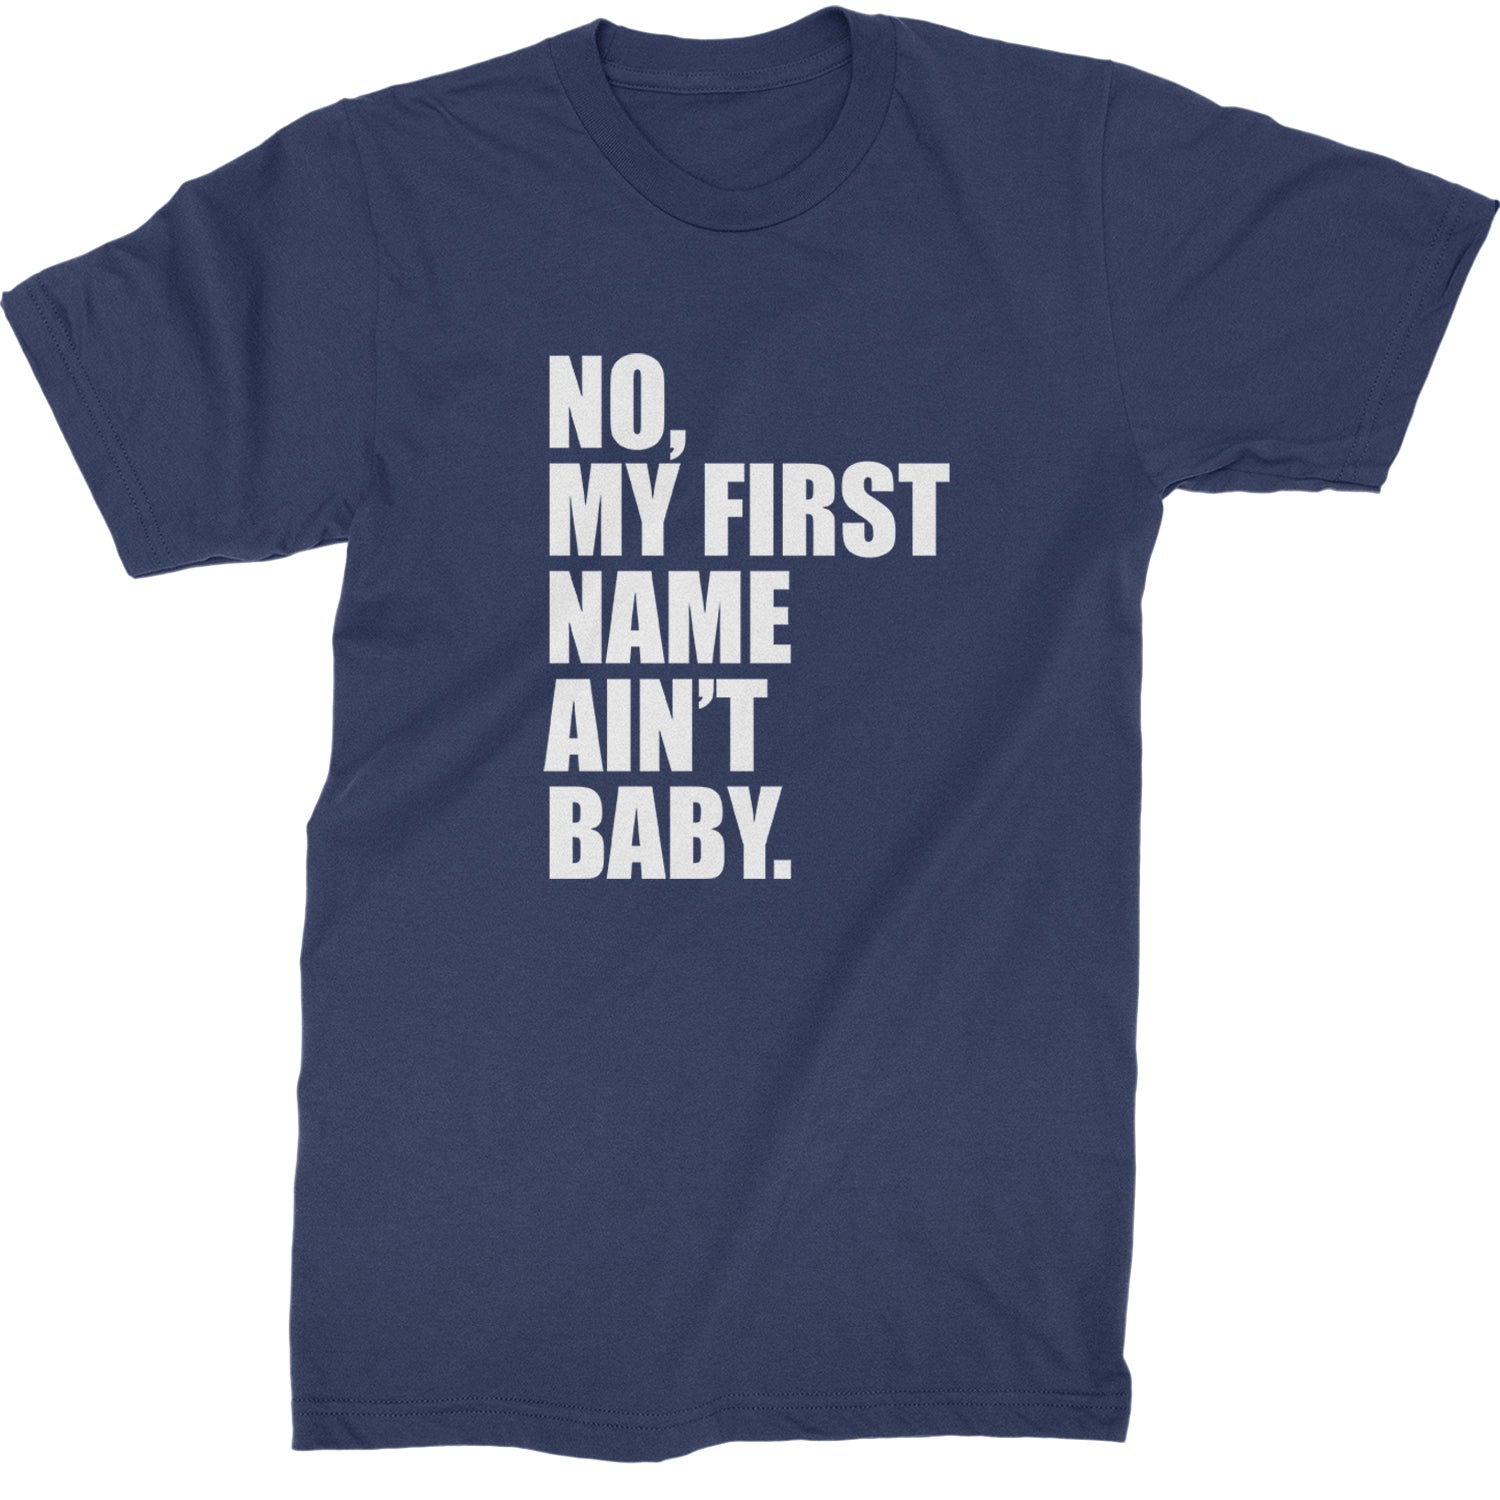 No My First Name Ain't Baby Together Again Mens T-shirt Navy Blue